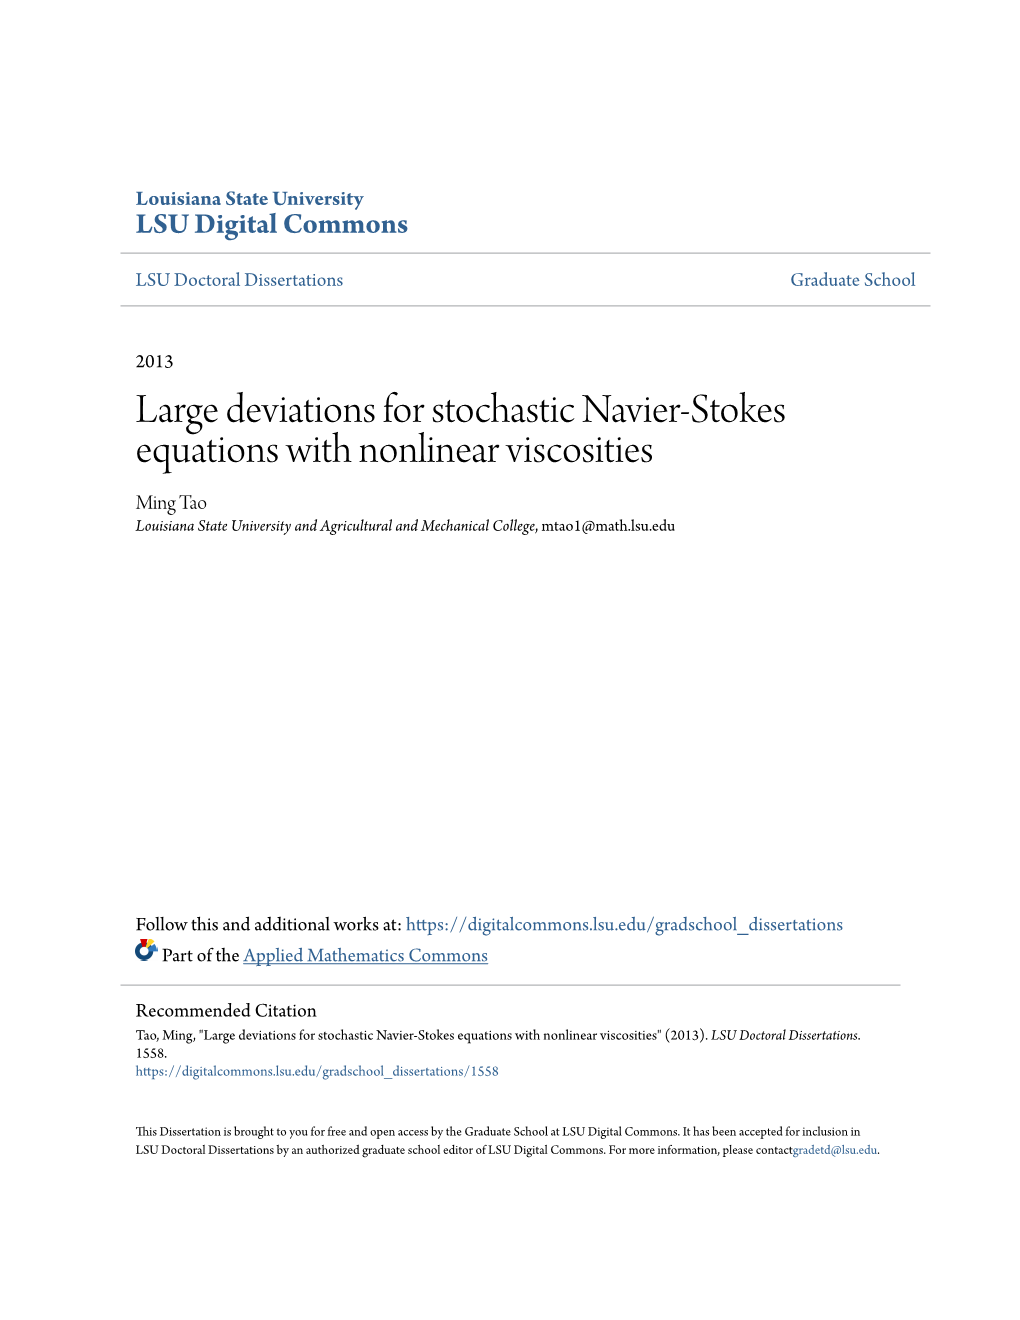 Large Deviations for Stochastic Navier-Stokes Equations With